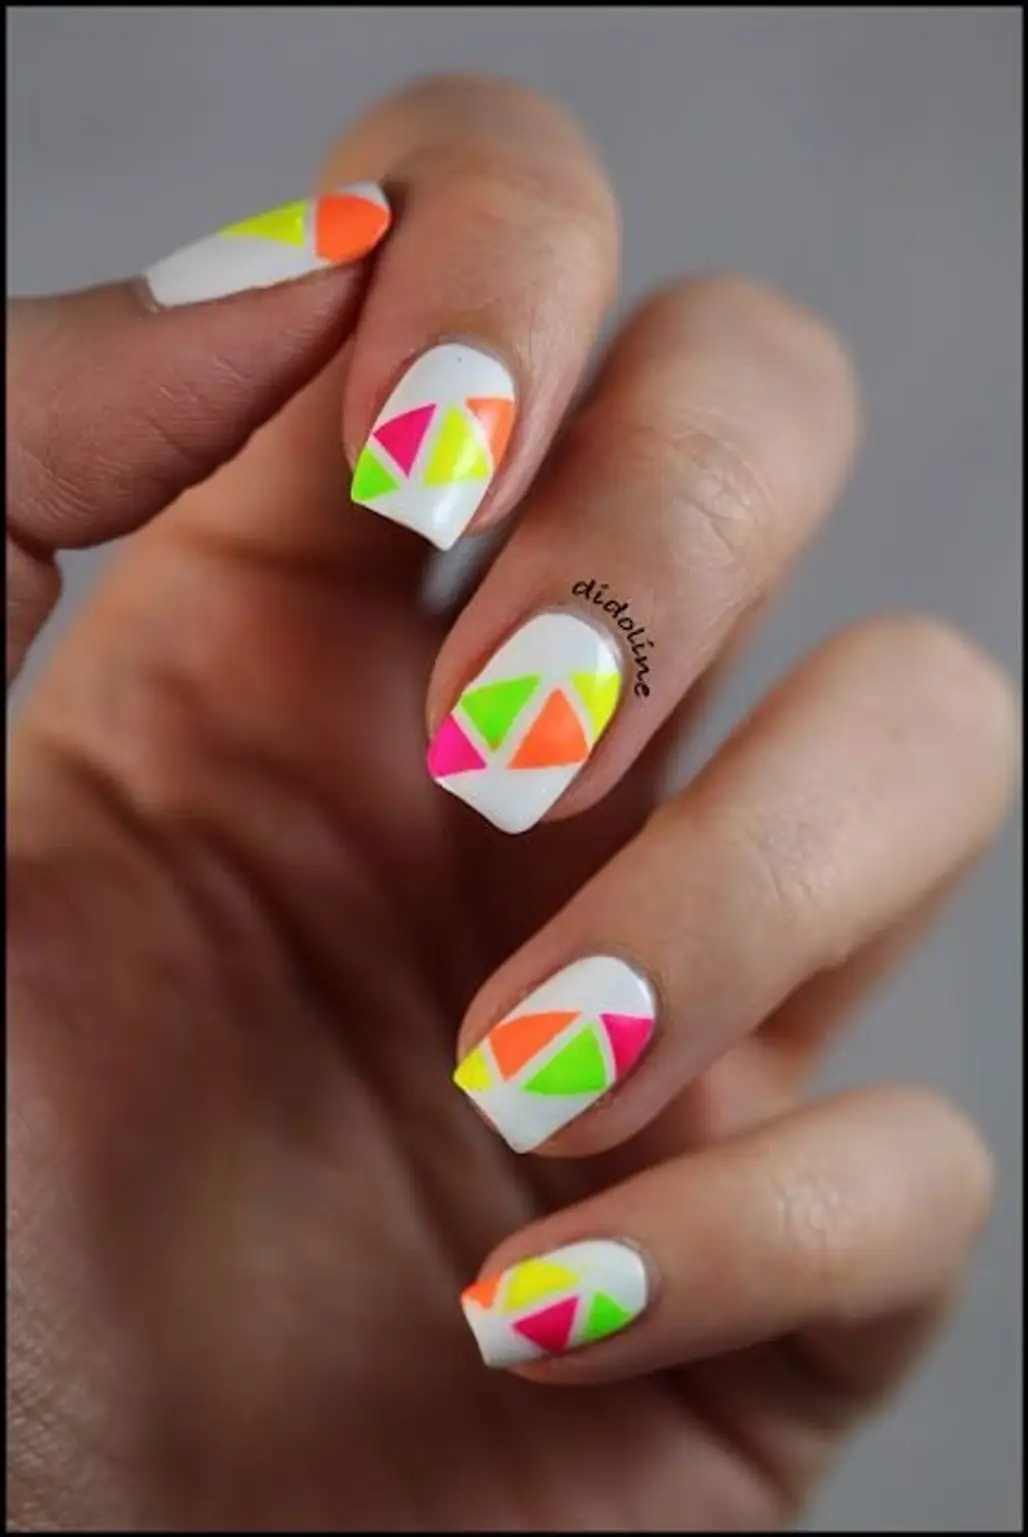 Neon Nails Are a Great Option